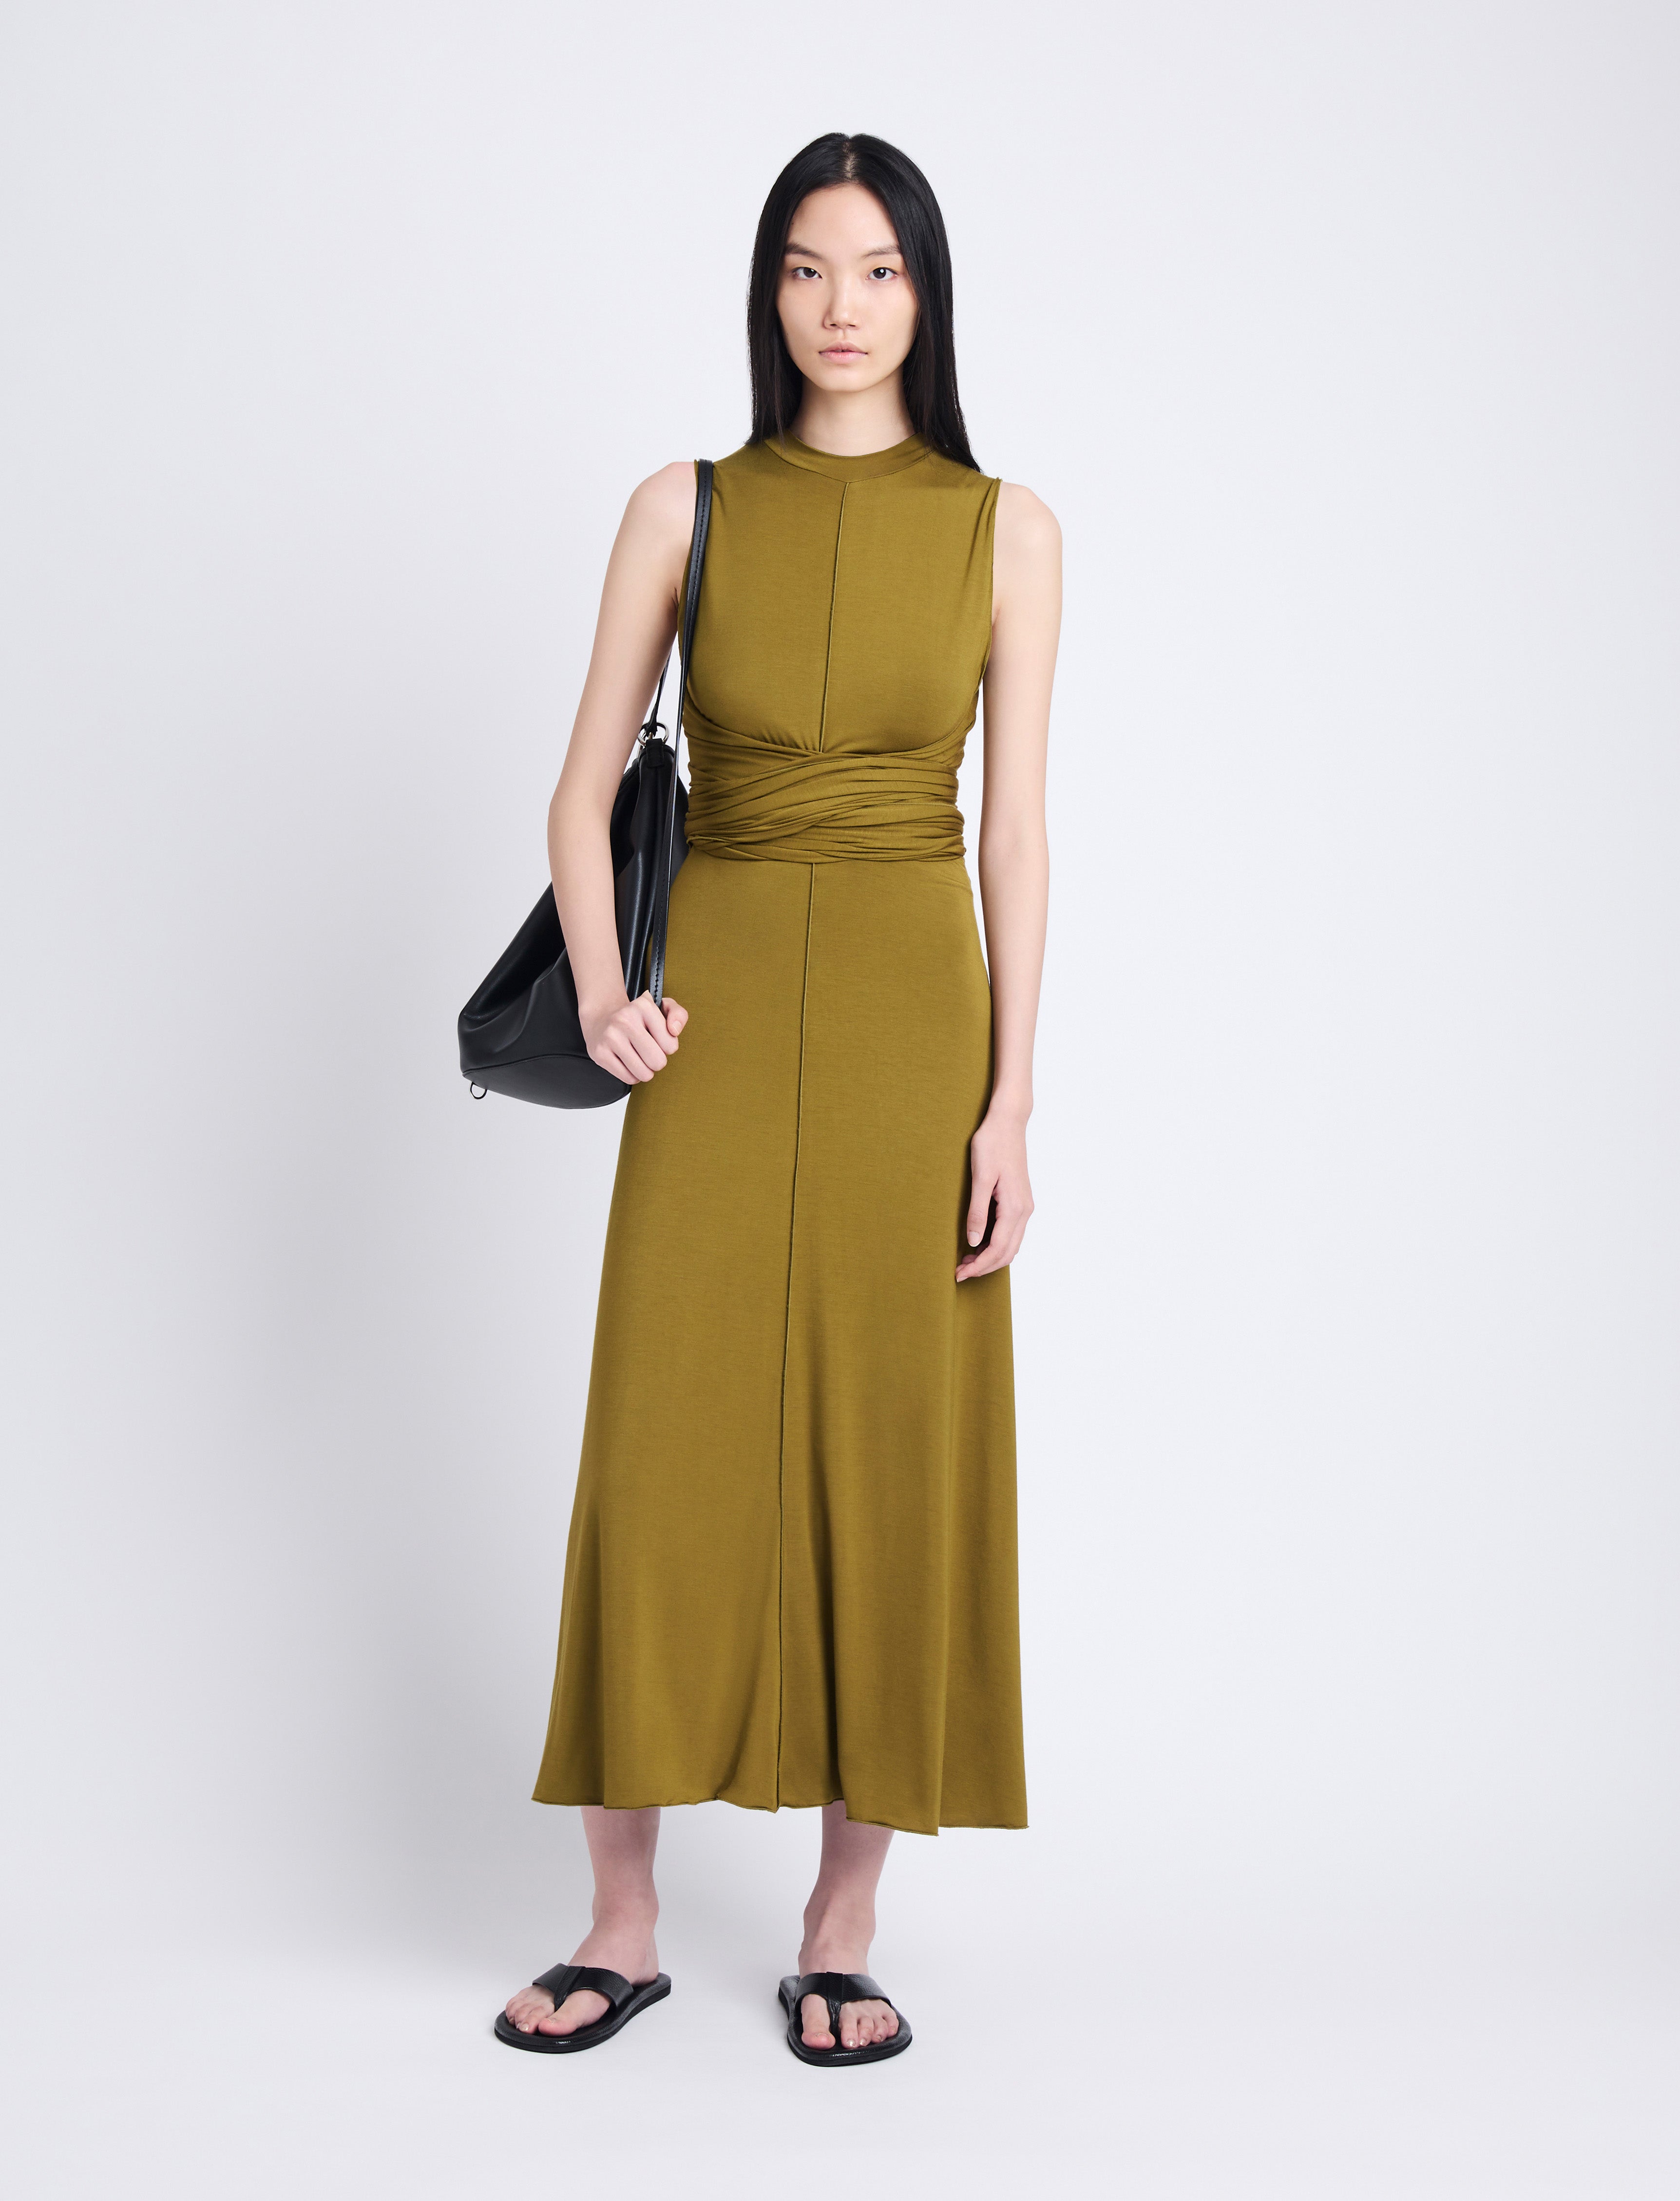 Beatrice Dress in Solid Jersey - Olive